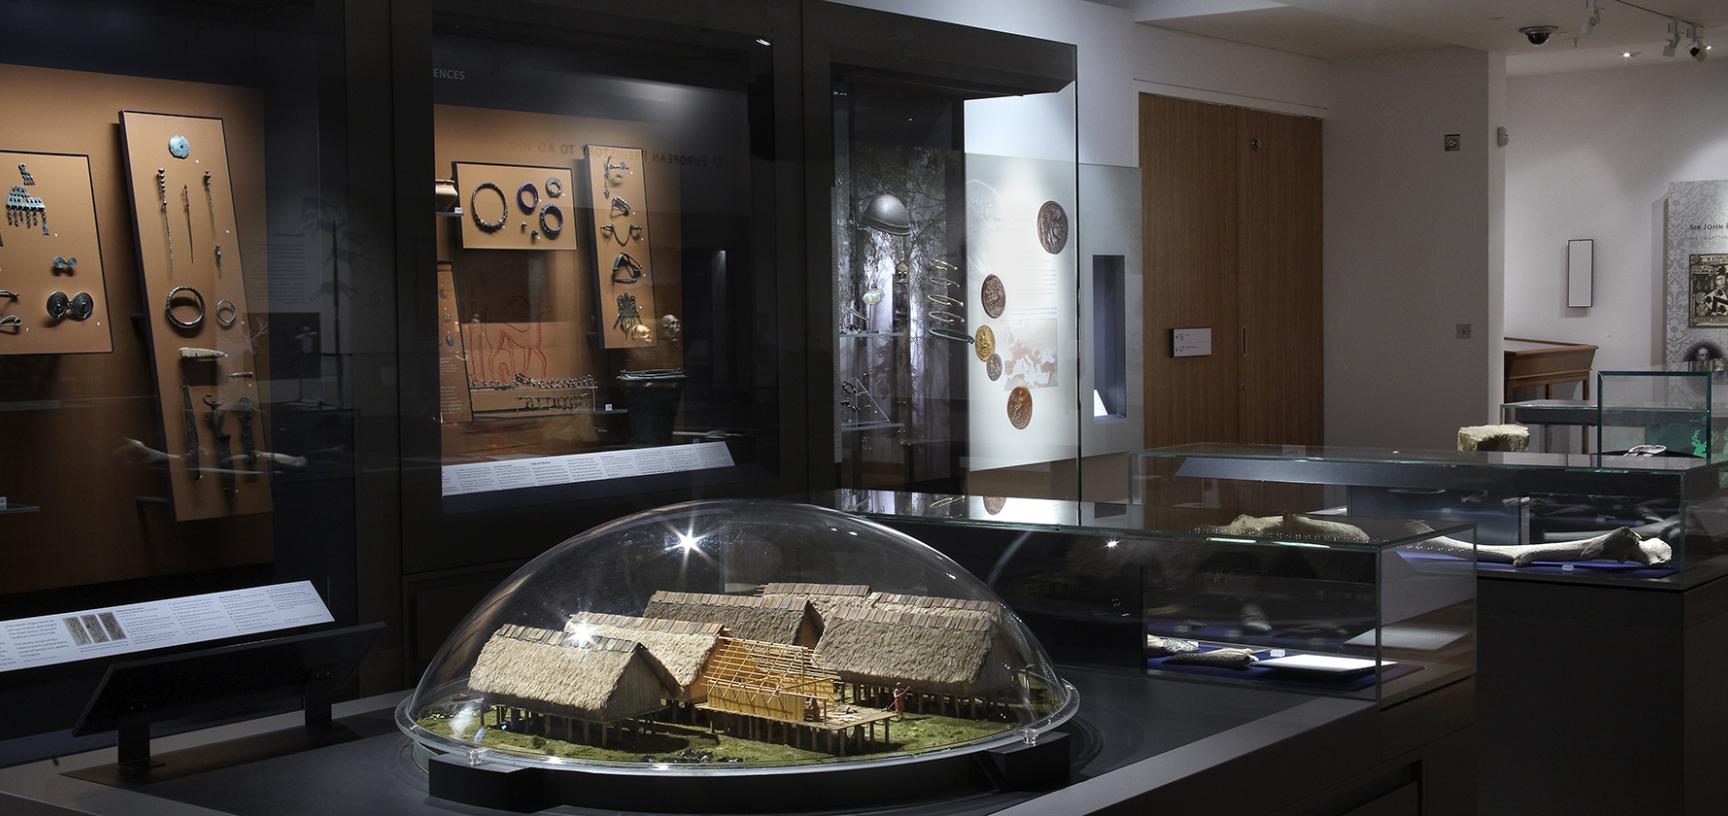 The European Prehistory Gallery at the Ashmolean Museum